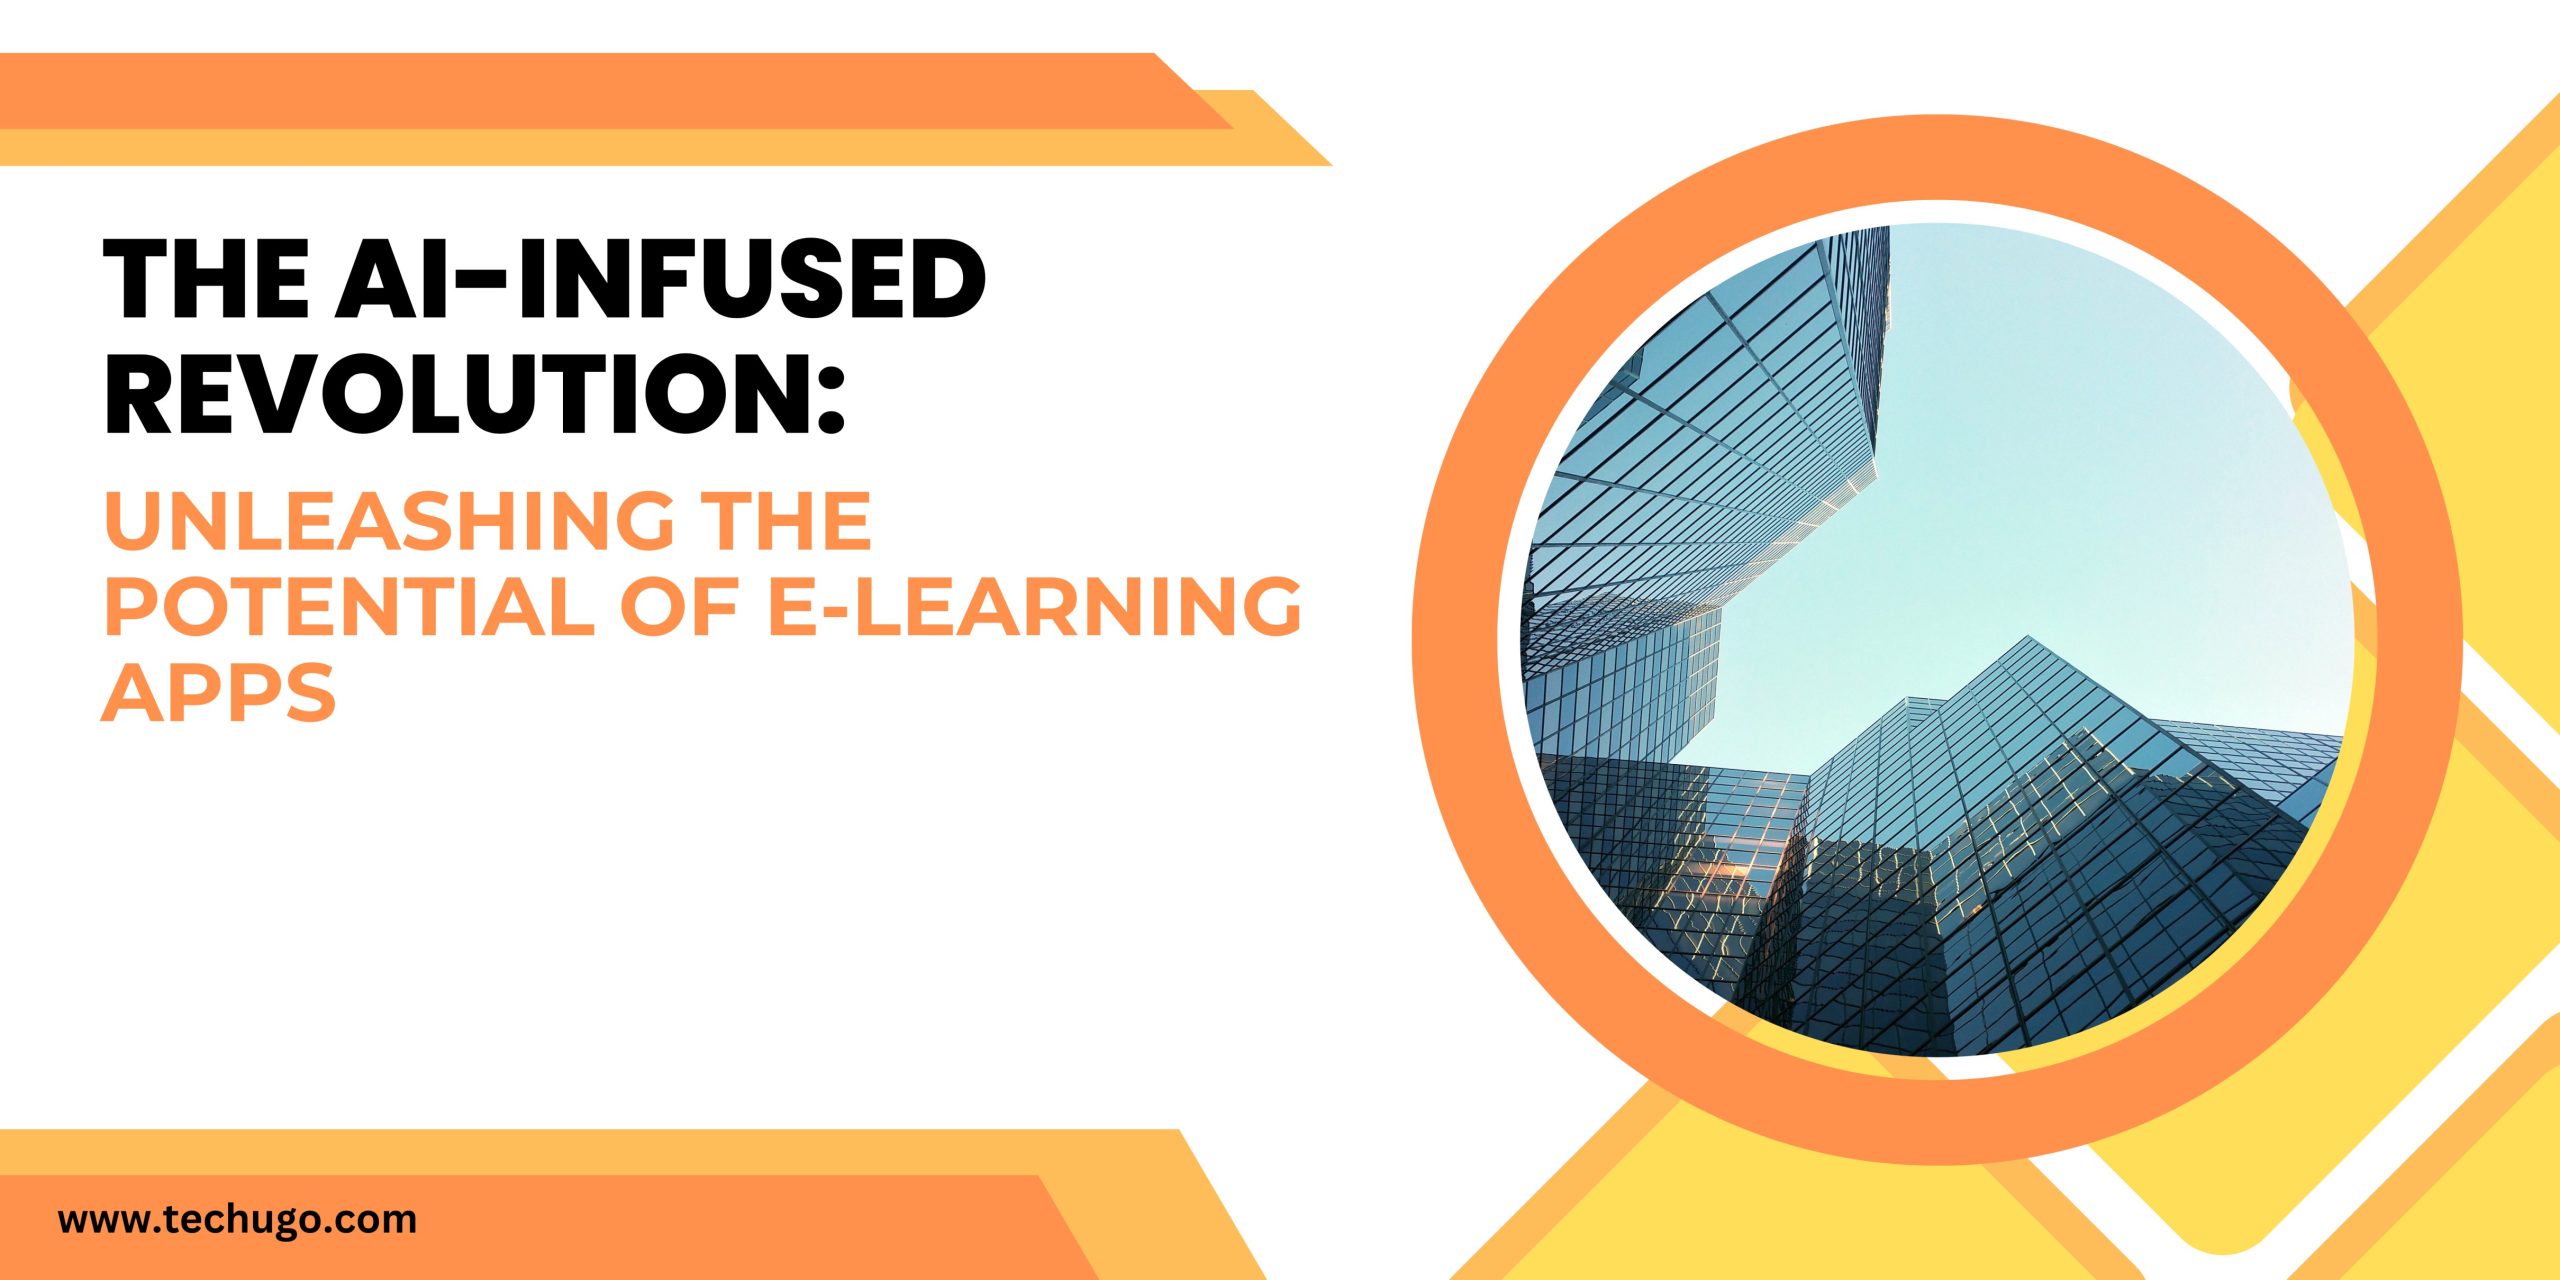 The AI-Infused Revolution: Unleashing the Potential of E-Learning Apps